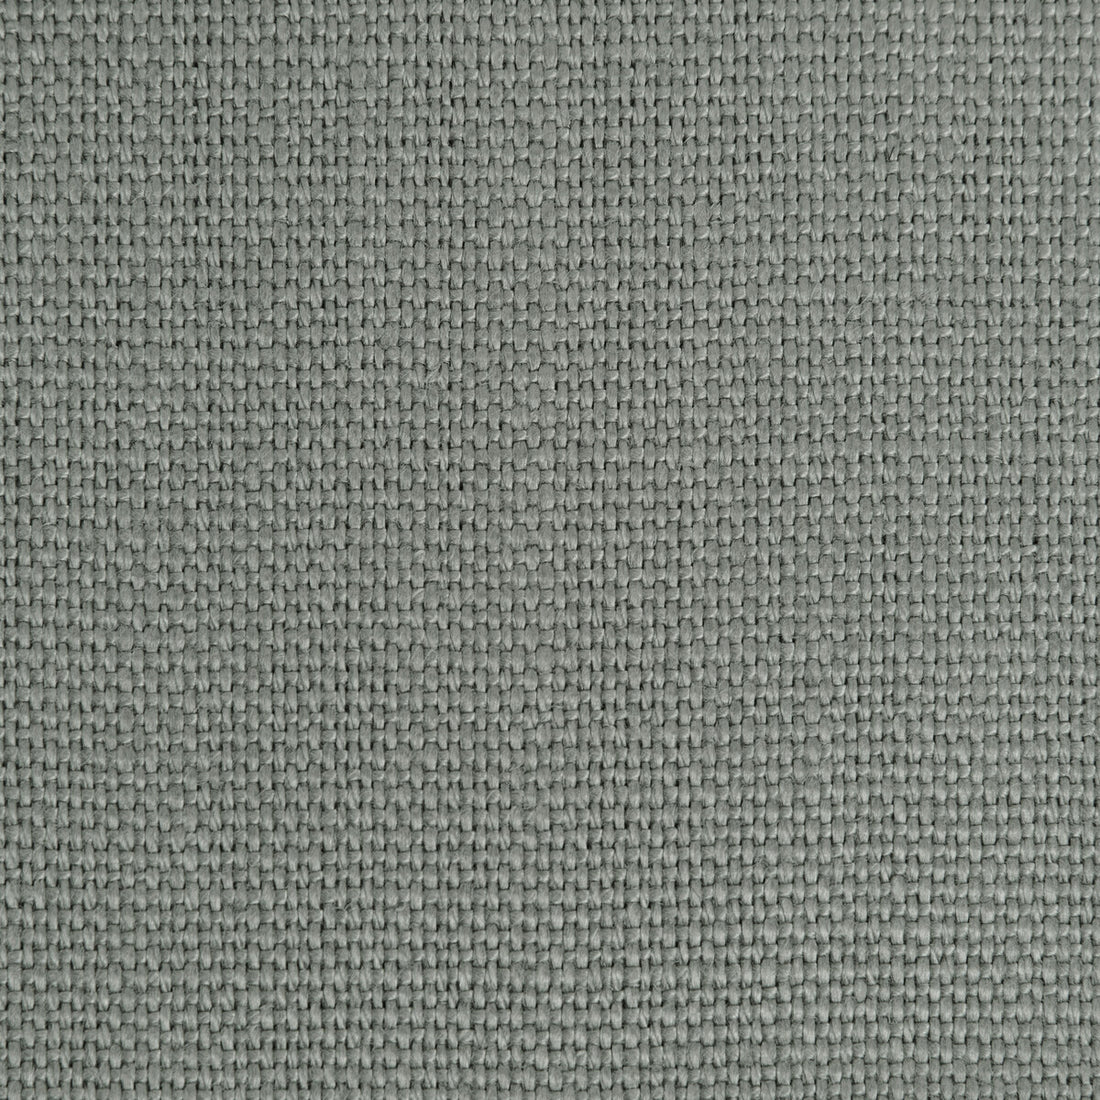 Hampton Linen fabric in steel color - pattern 2012171.52.0 - by Lee Jofa in the Colour Complements II collection